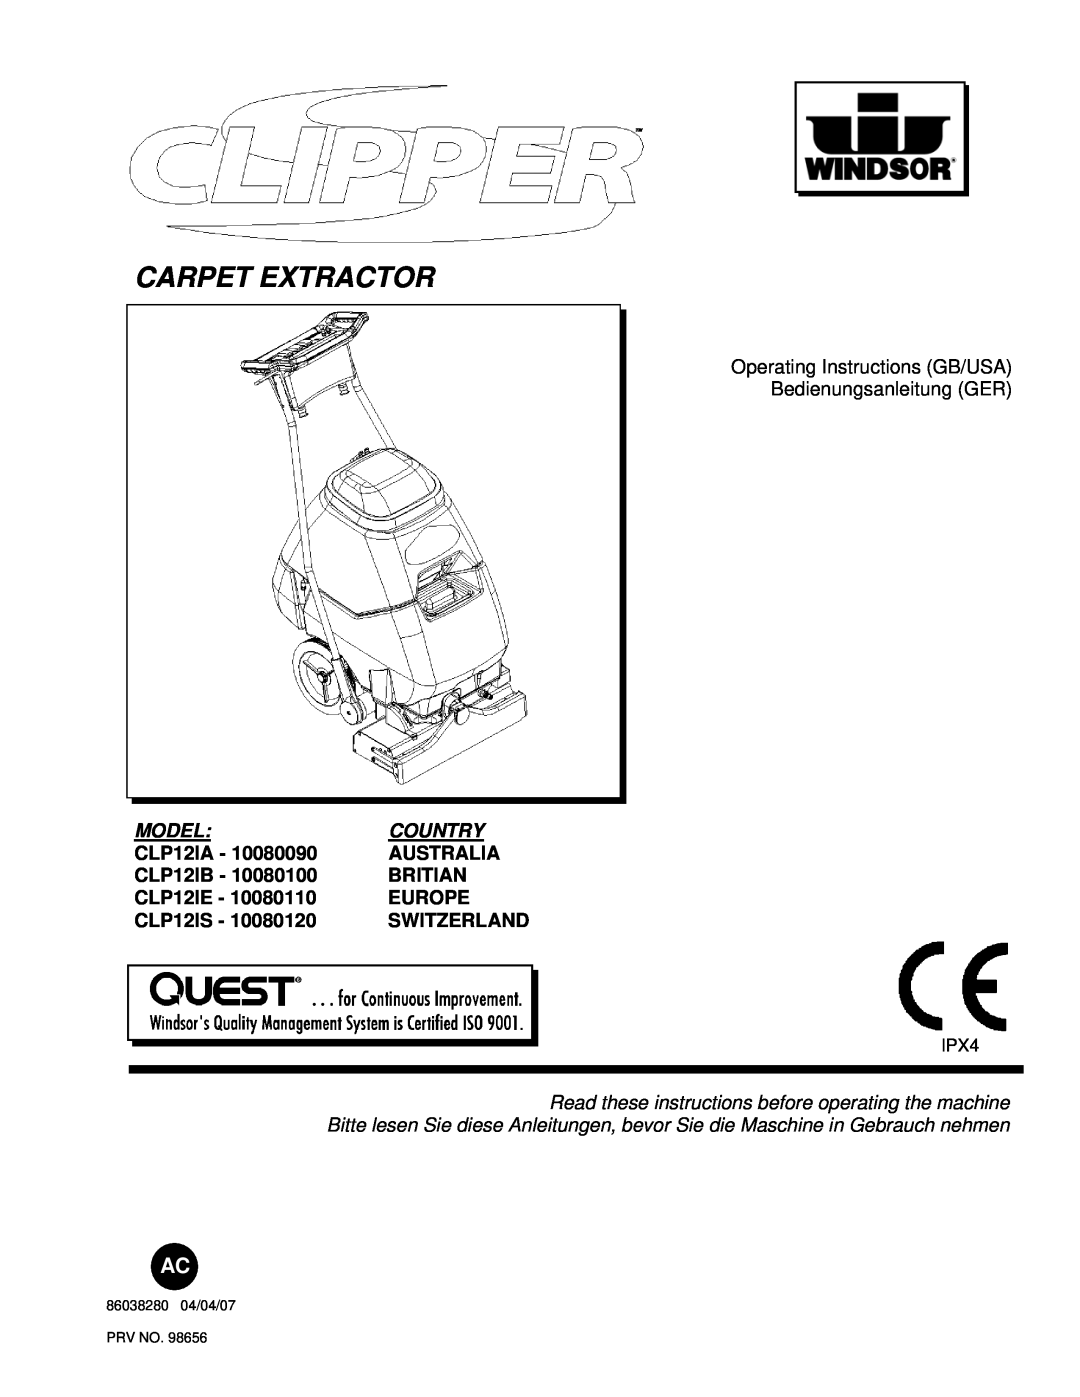 Windsor CLP12IE manual Operating Instructions GB/USA, Bedienungsanleitung GER, Model Country, CLP12IA - 10080090 AUSTRALIA 